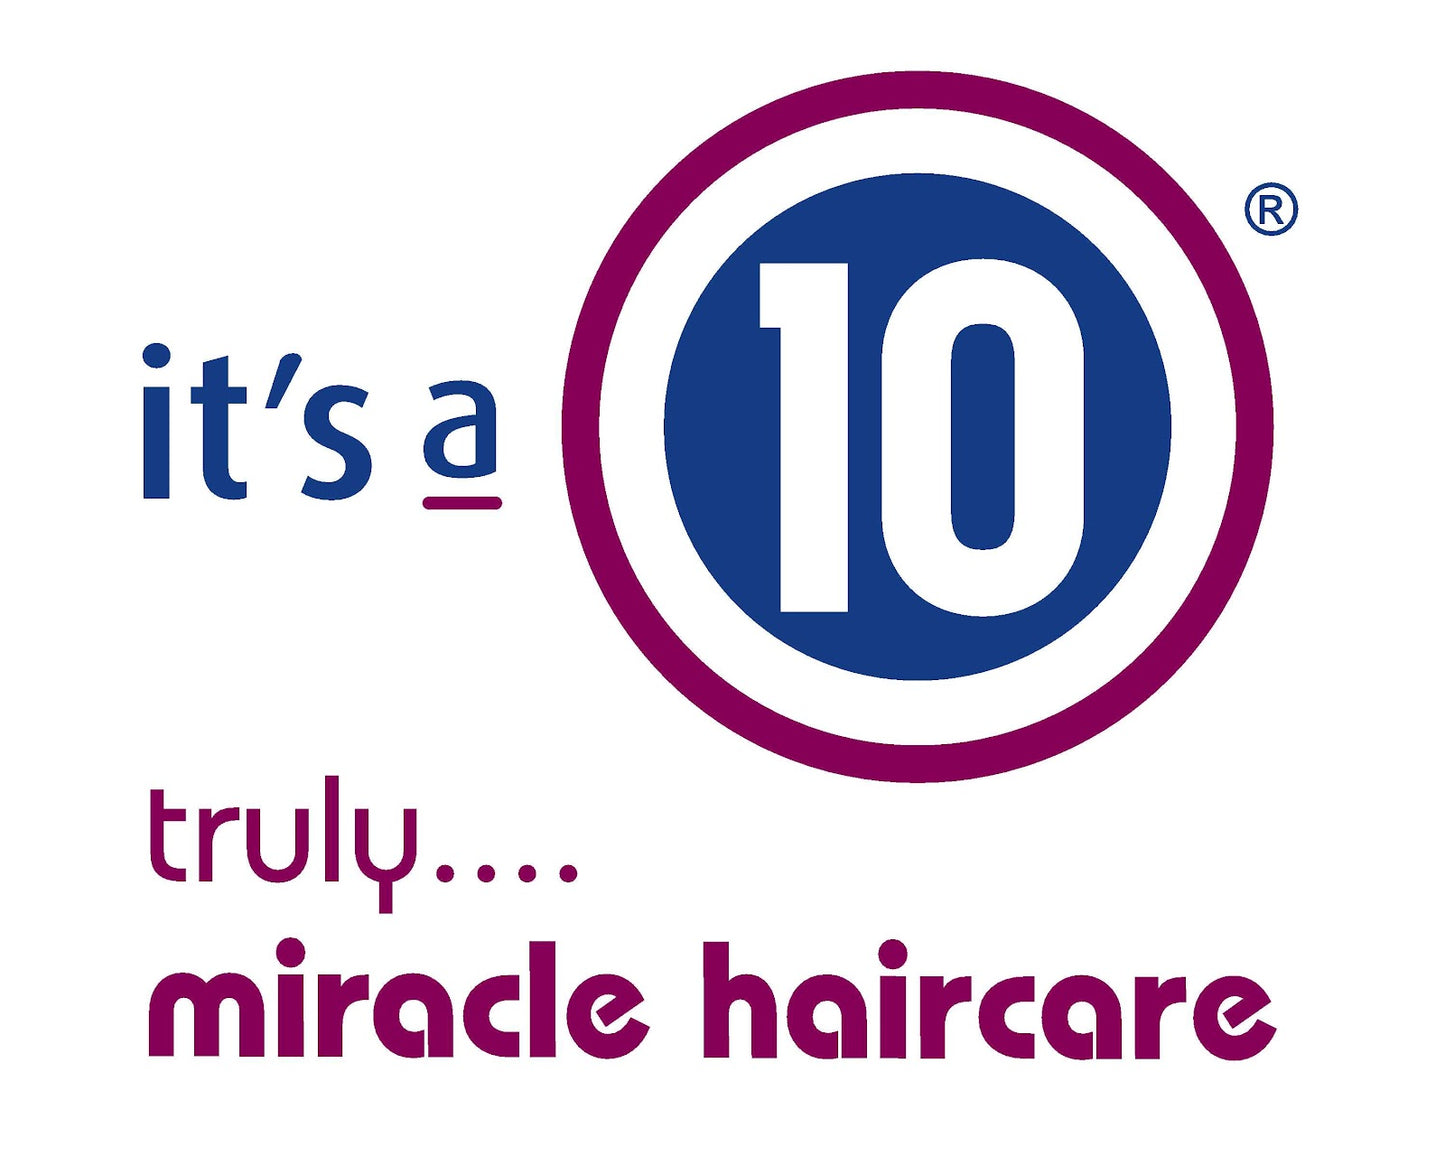 It's a 10 Potion 10 Miracle Instant Repair Leave-In 2 Oz